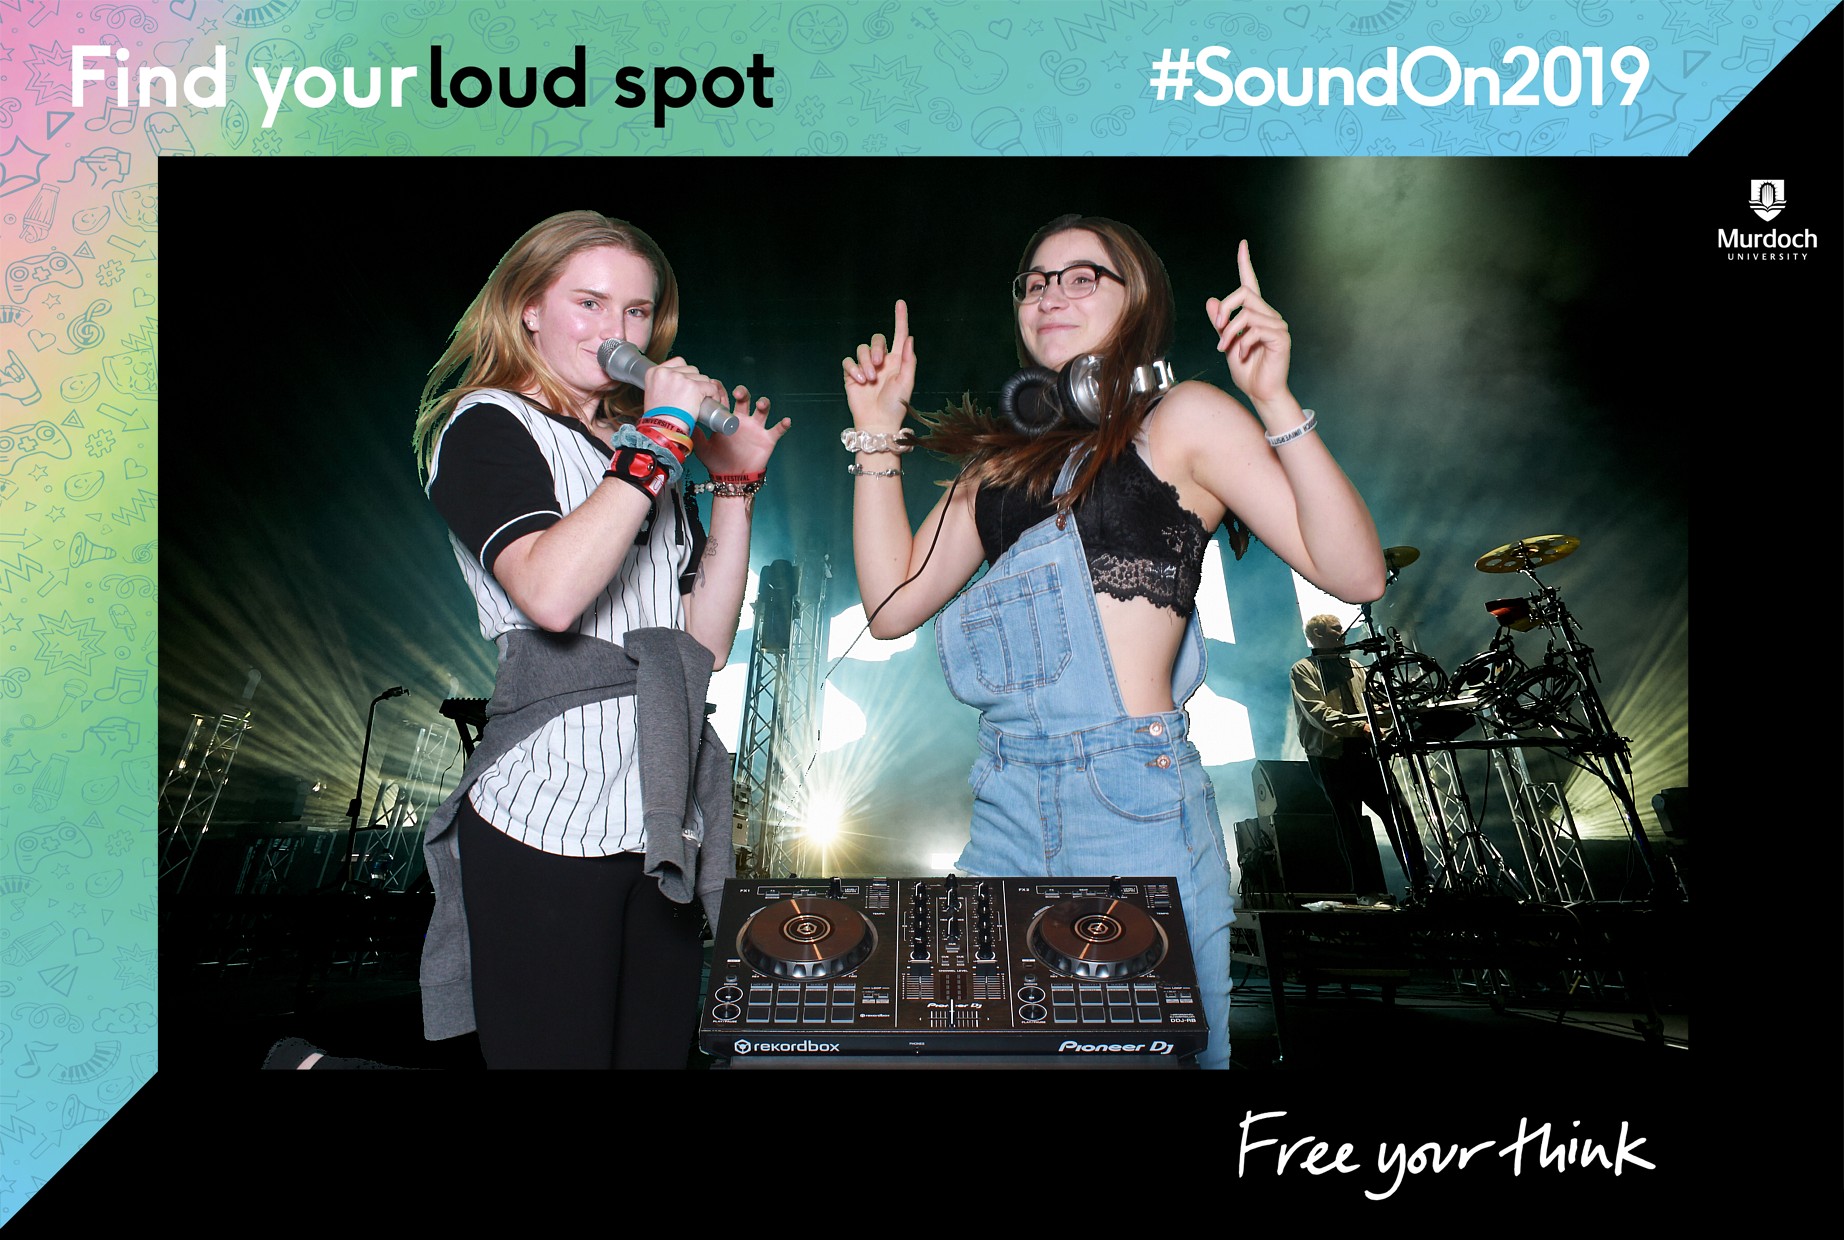 Green Screen Photo Booth - Sound On 2019